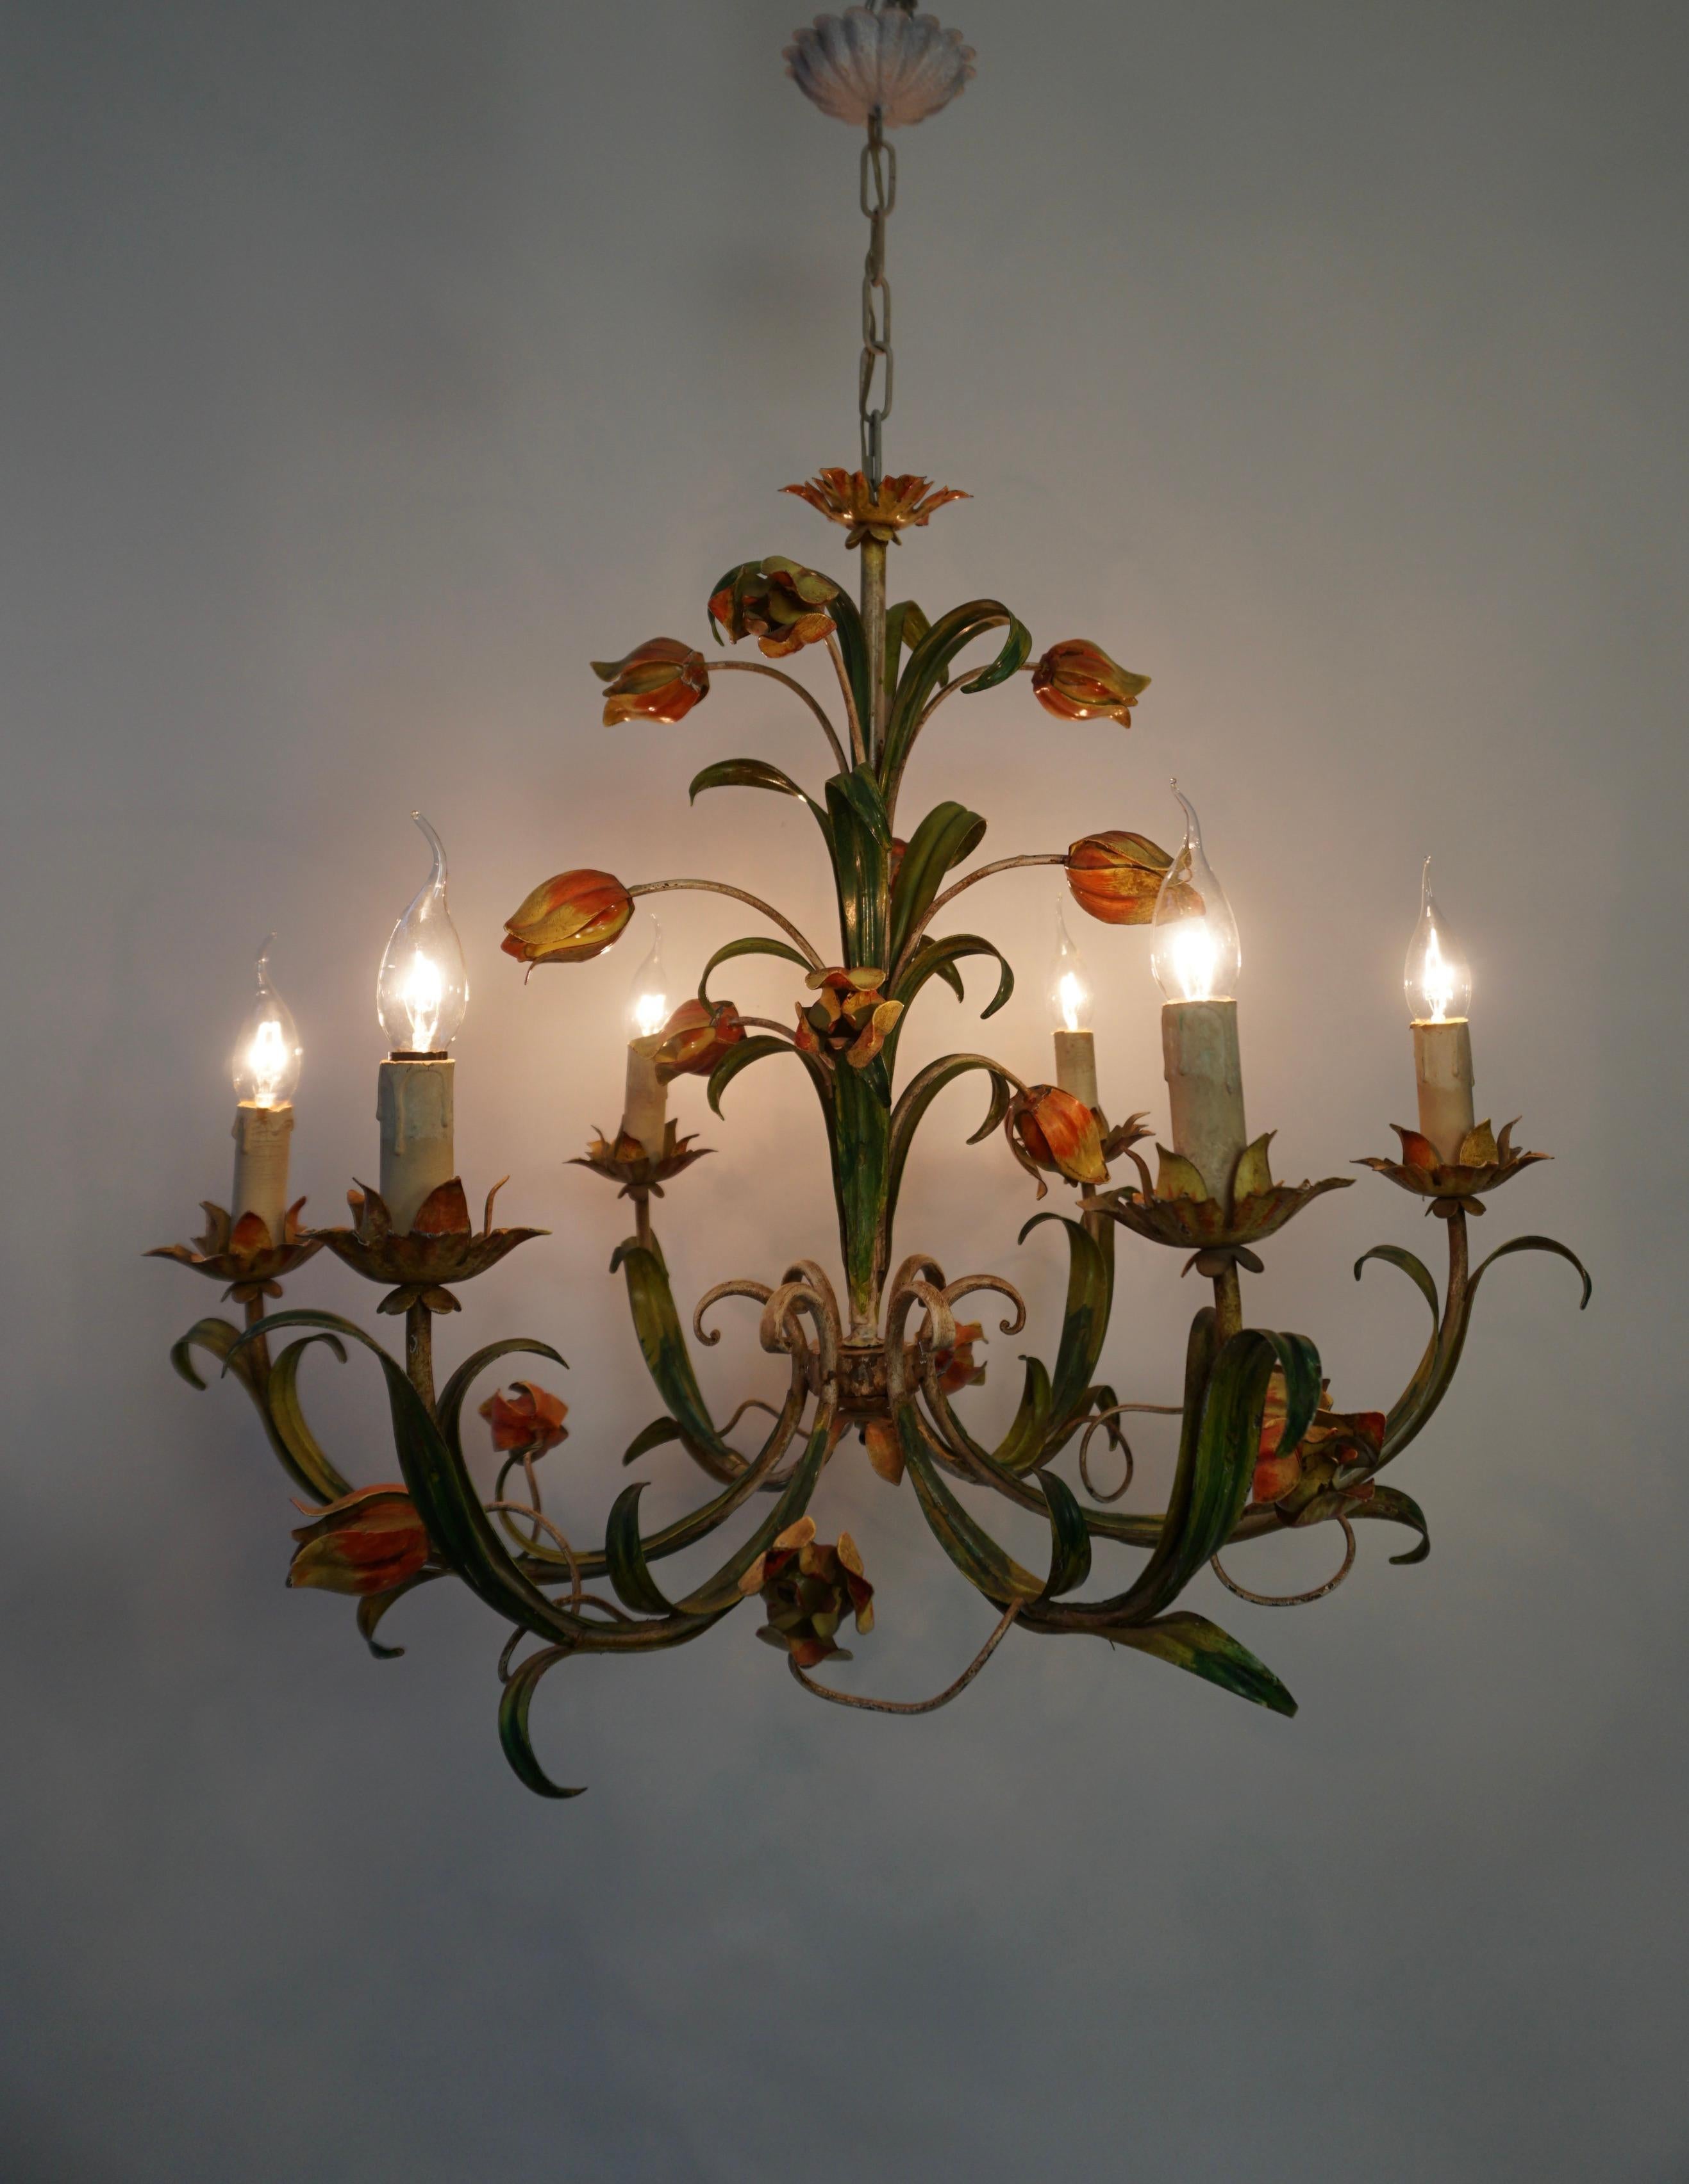 Large Italian Tole chandelier with beautiful tulip flowers.

A large Hollywood Regency six-armed tole flower chandelier from Italy manufactured in the mid-century (1960s and 1970s). The lamp has six sockets for small incandescent lamps with screw